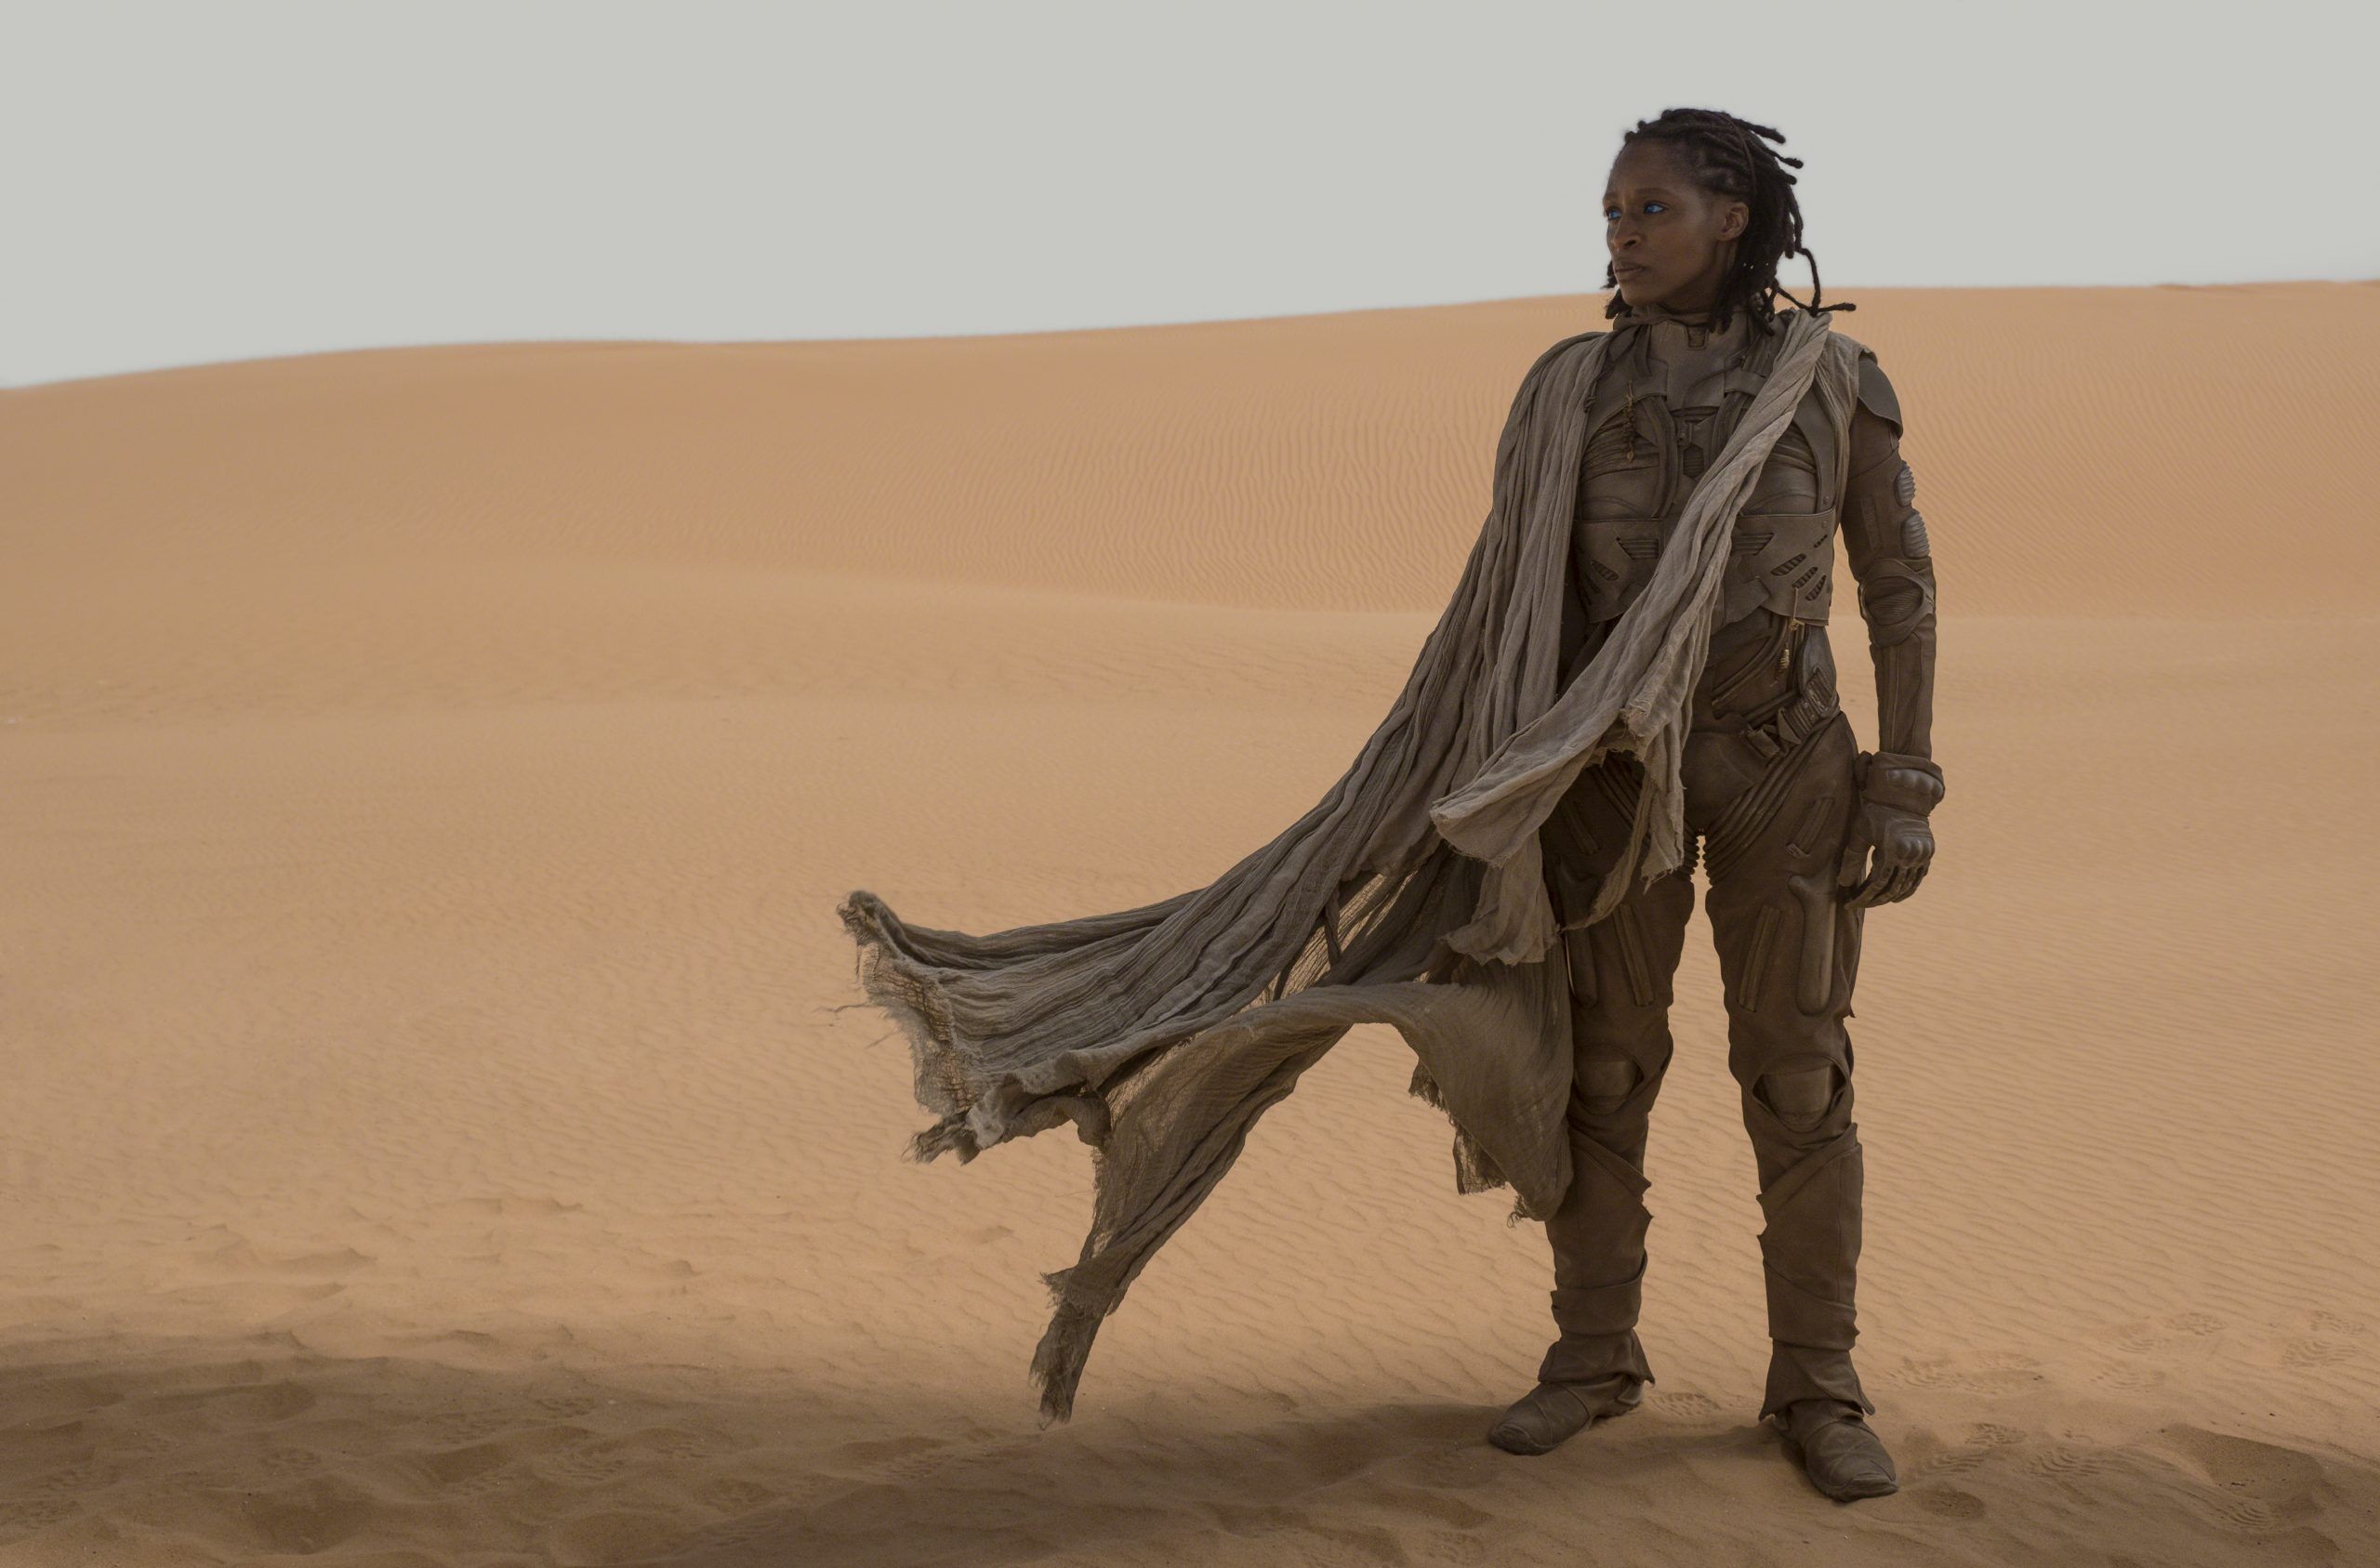 Enjoy These Dune Image in Glorious HD, Especially Oscar Isaac